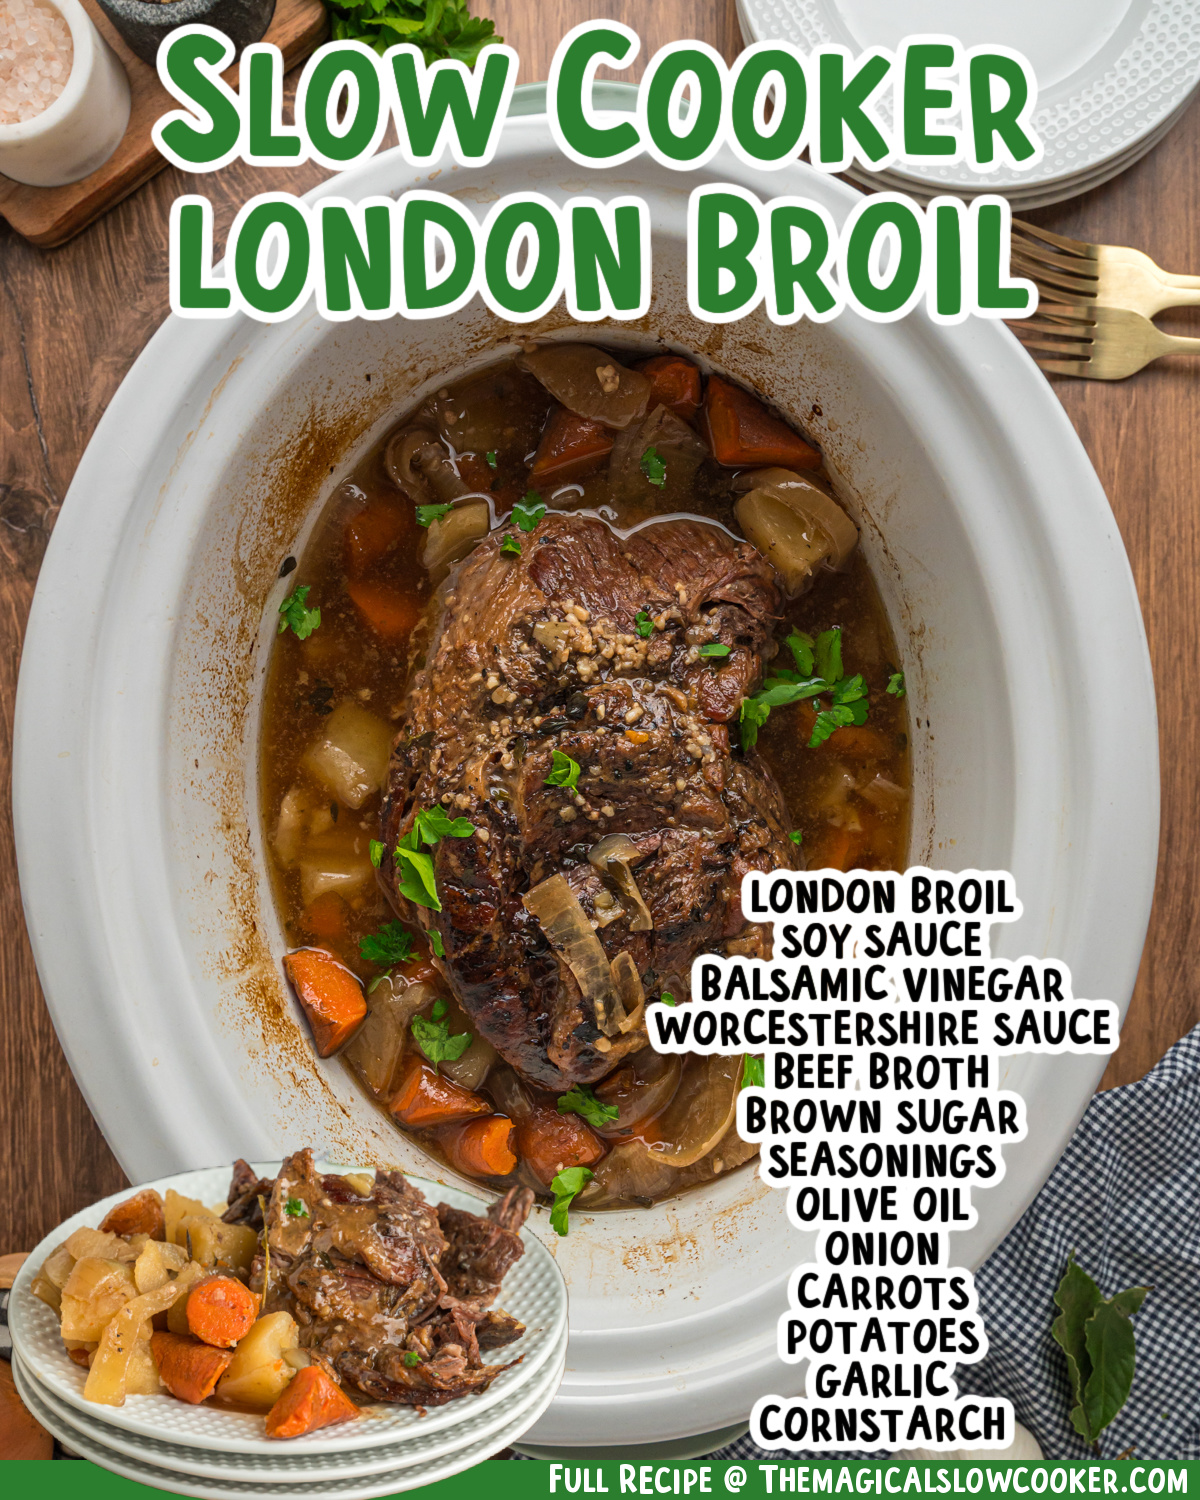 two images of slow cooker london broil with text list of ingredients.